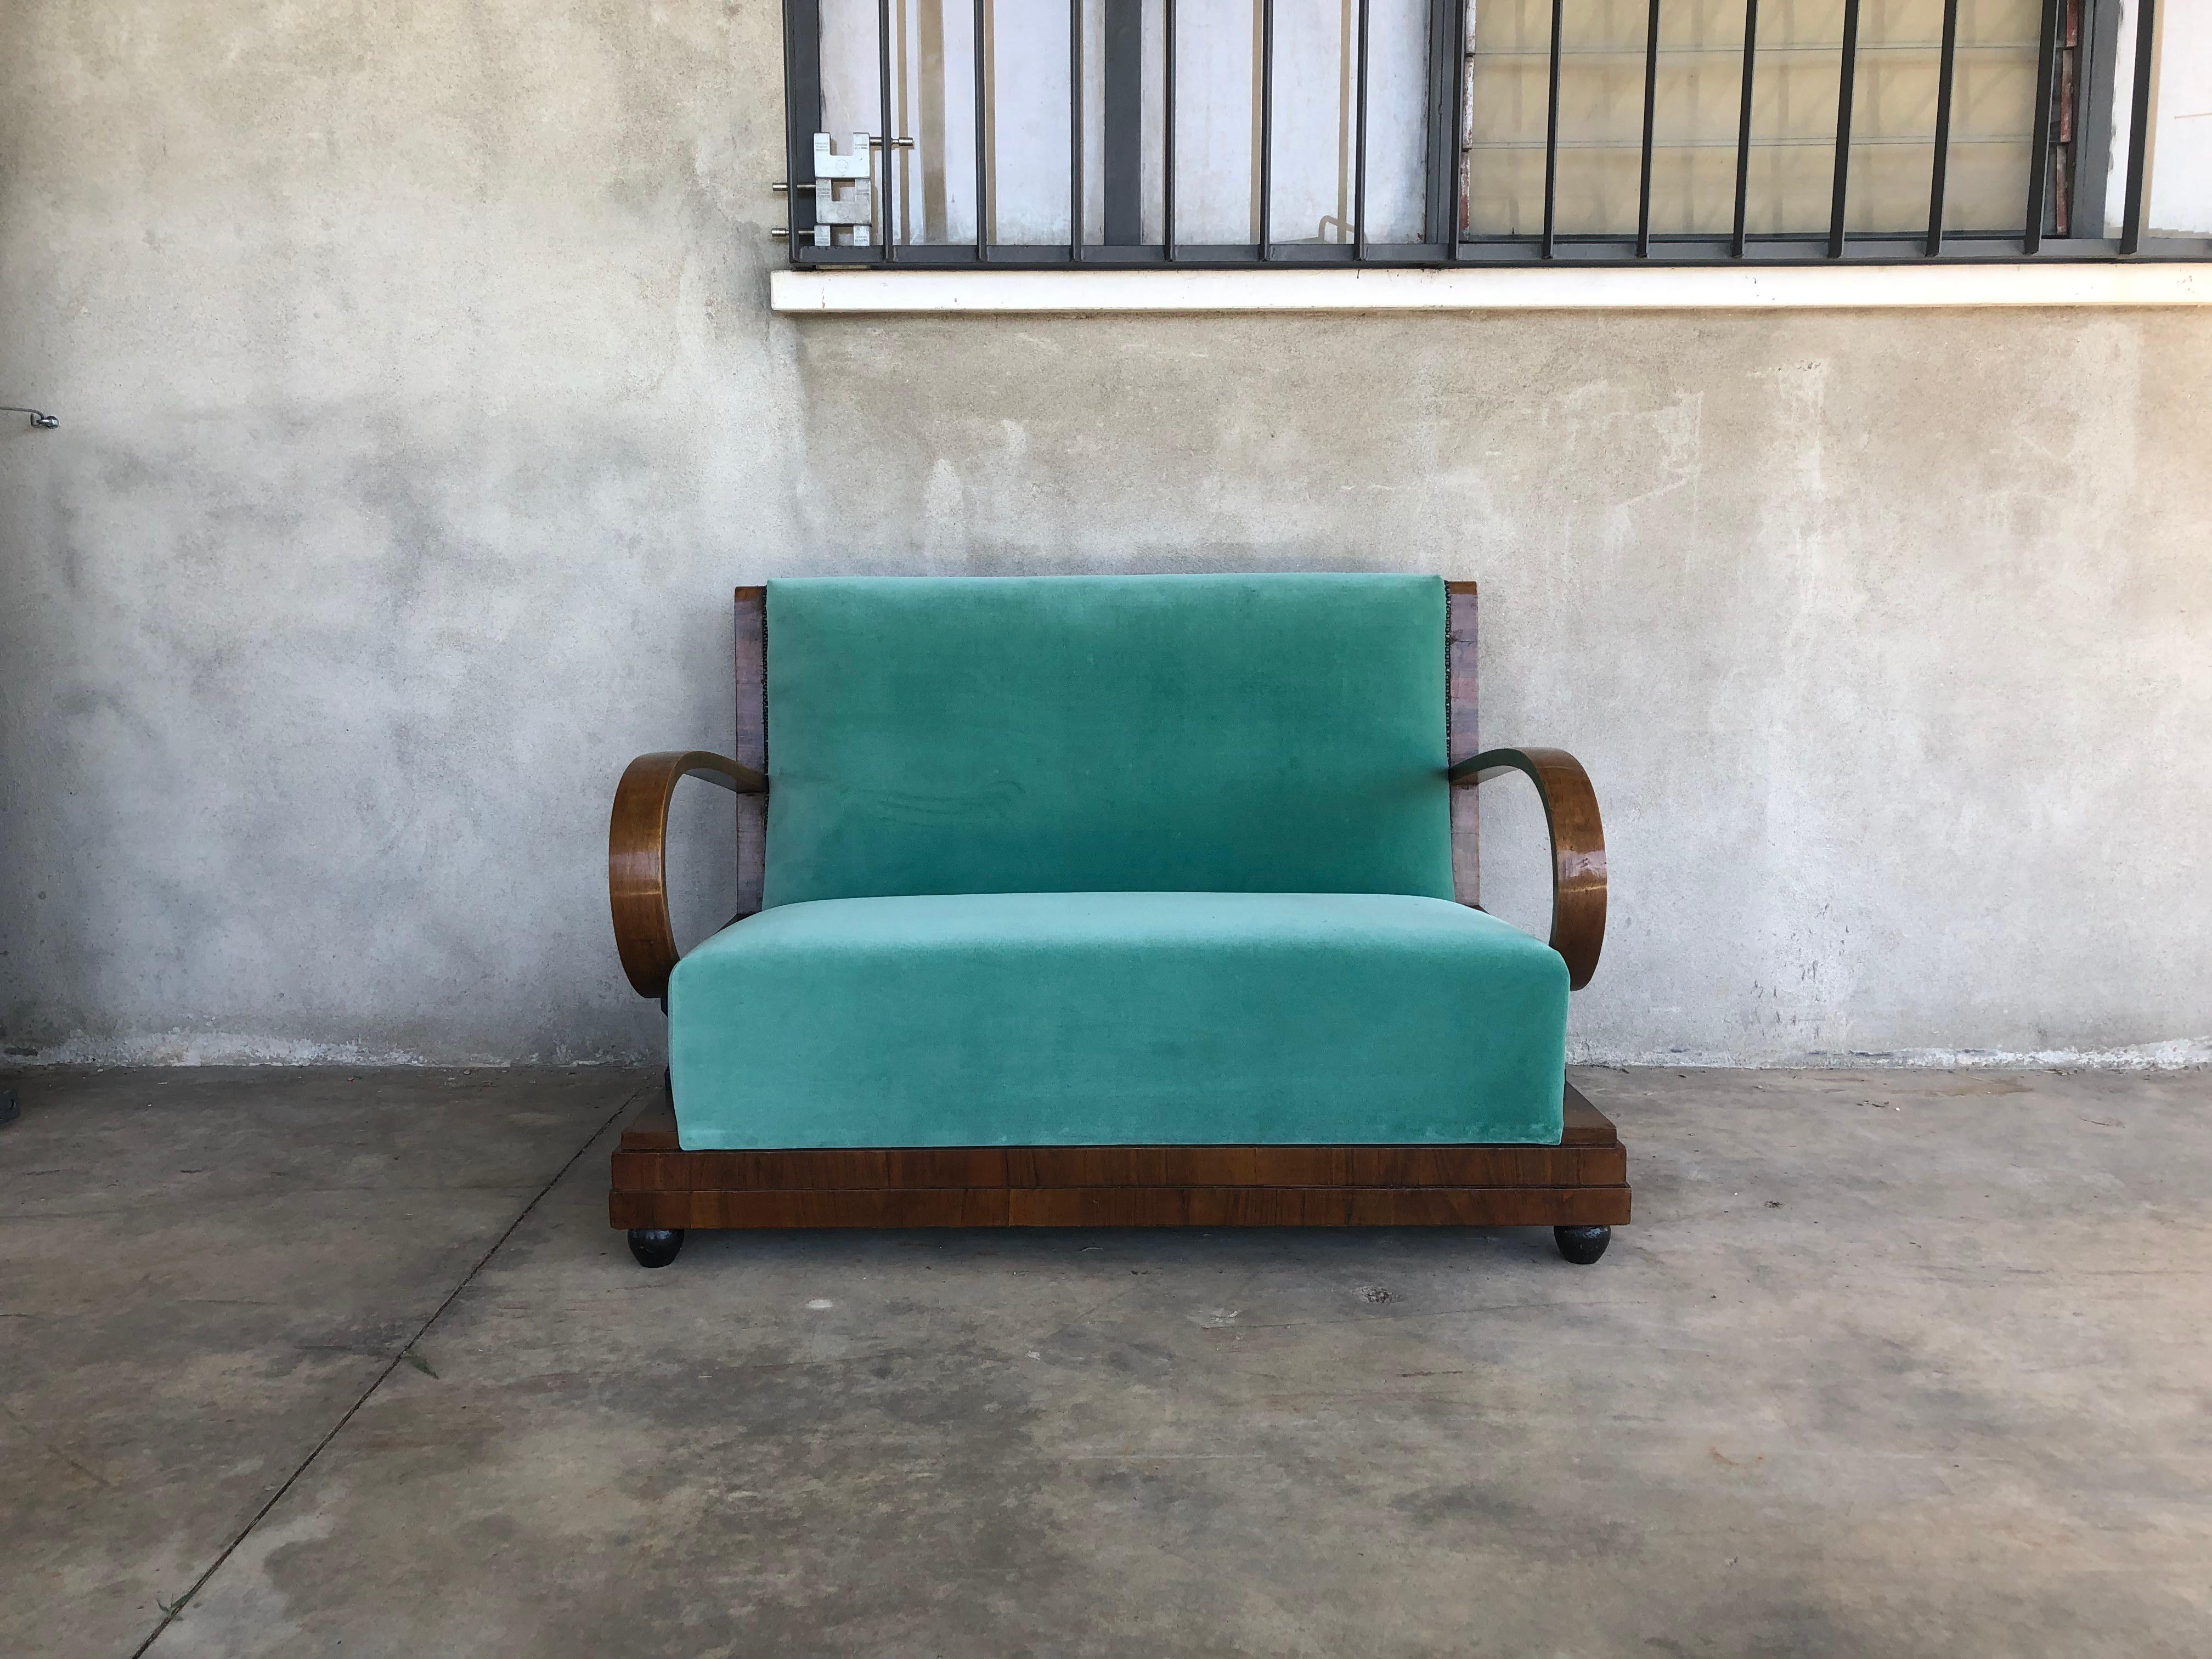 Art Deco sofa in light green velvet. A sofa From 1930s period from France. The walnut wood structure can be appreciated for the rectangular back rest, which allows the sofa to be place in the middle of the room. Feet are black ebonized and have